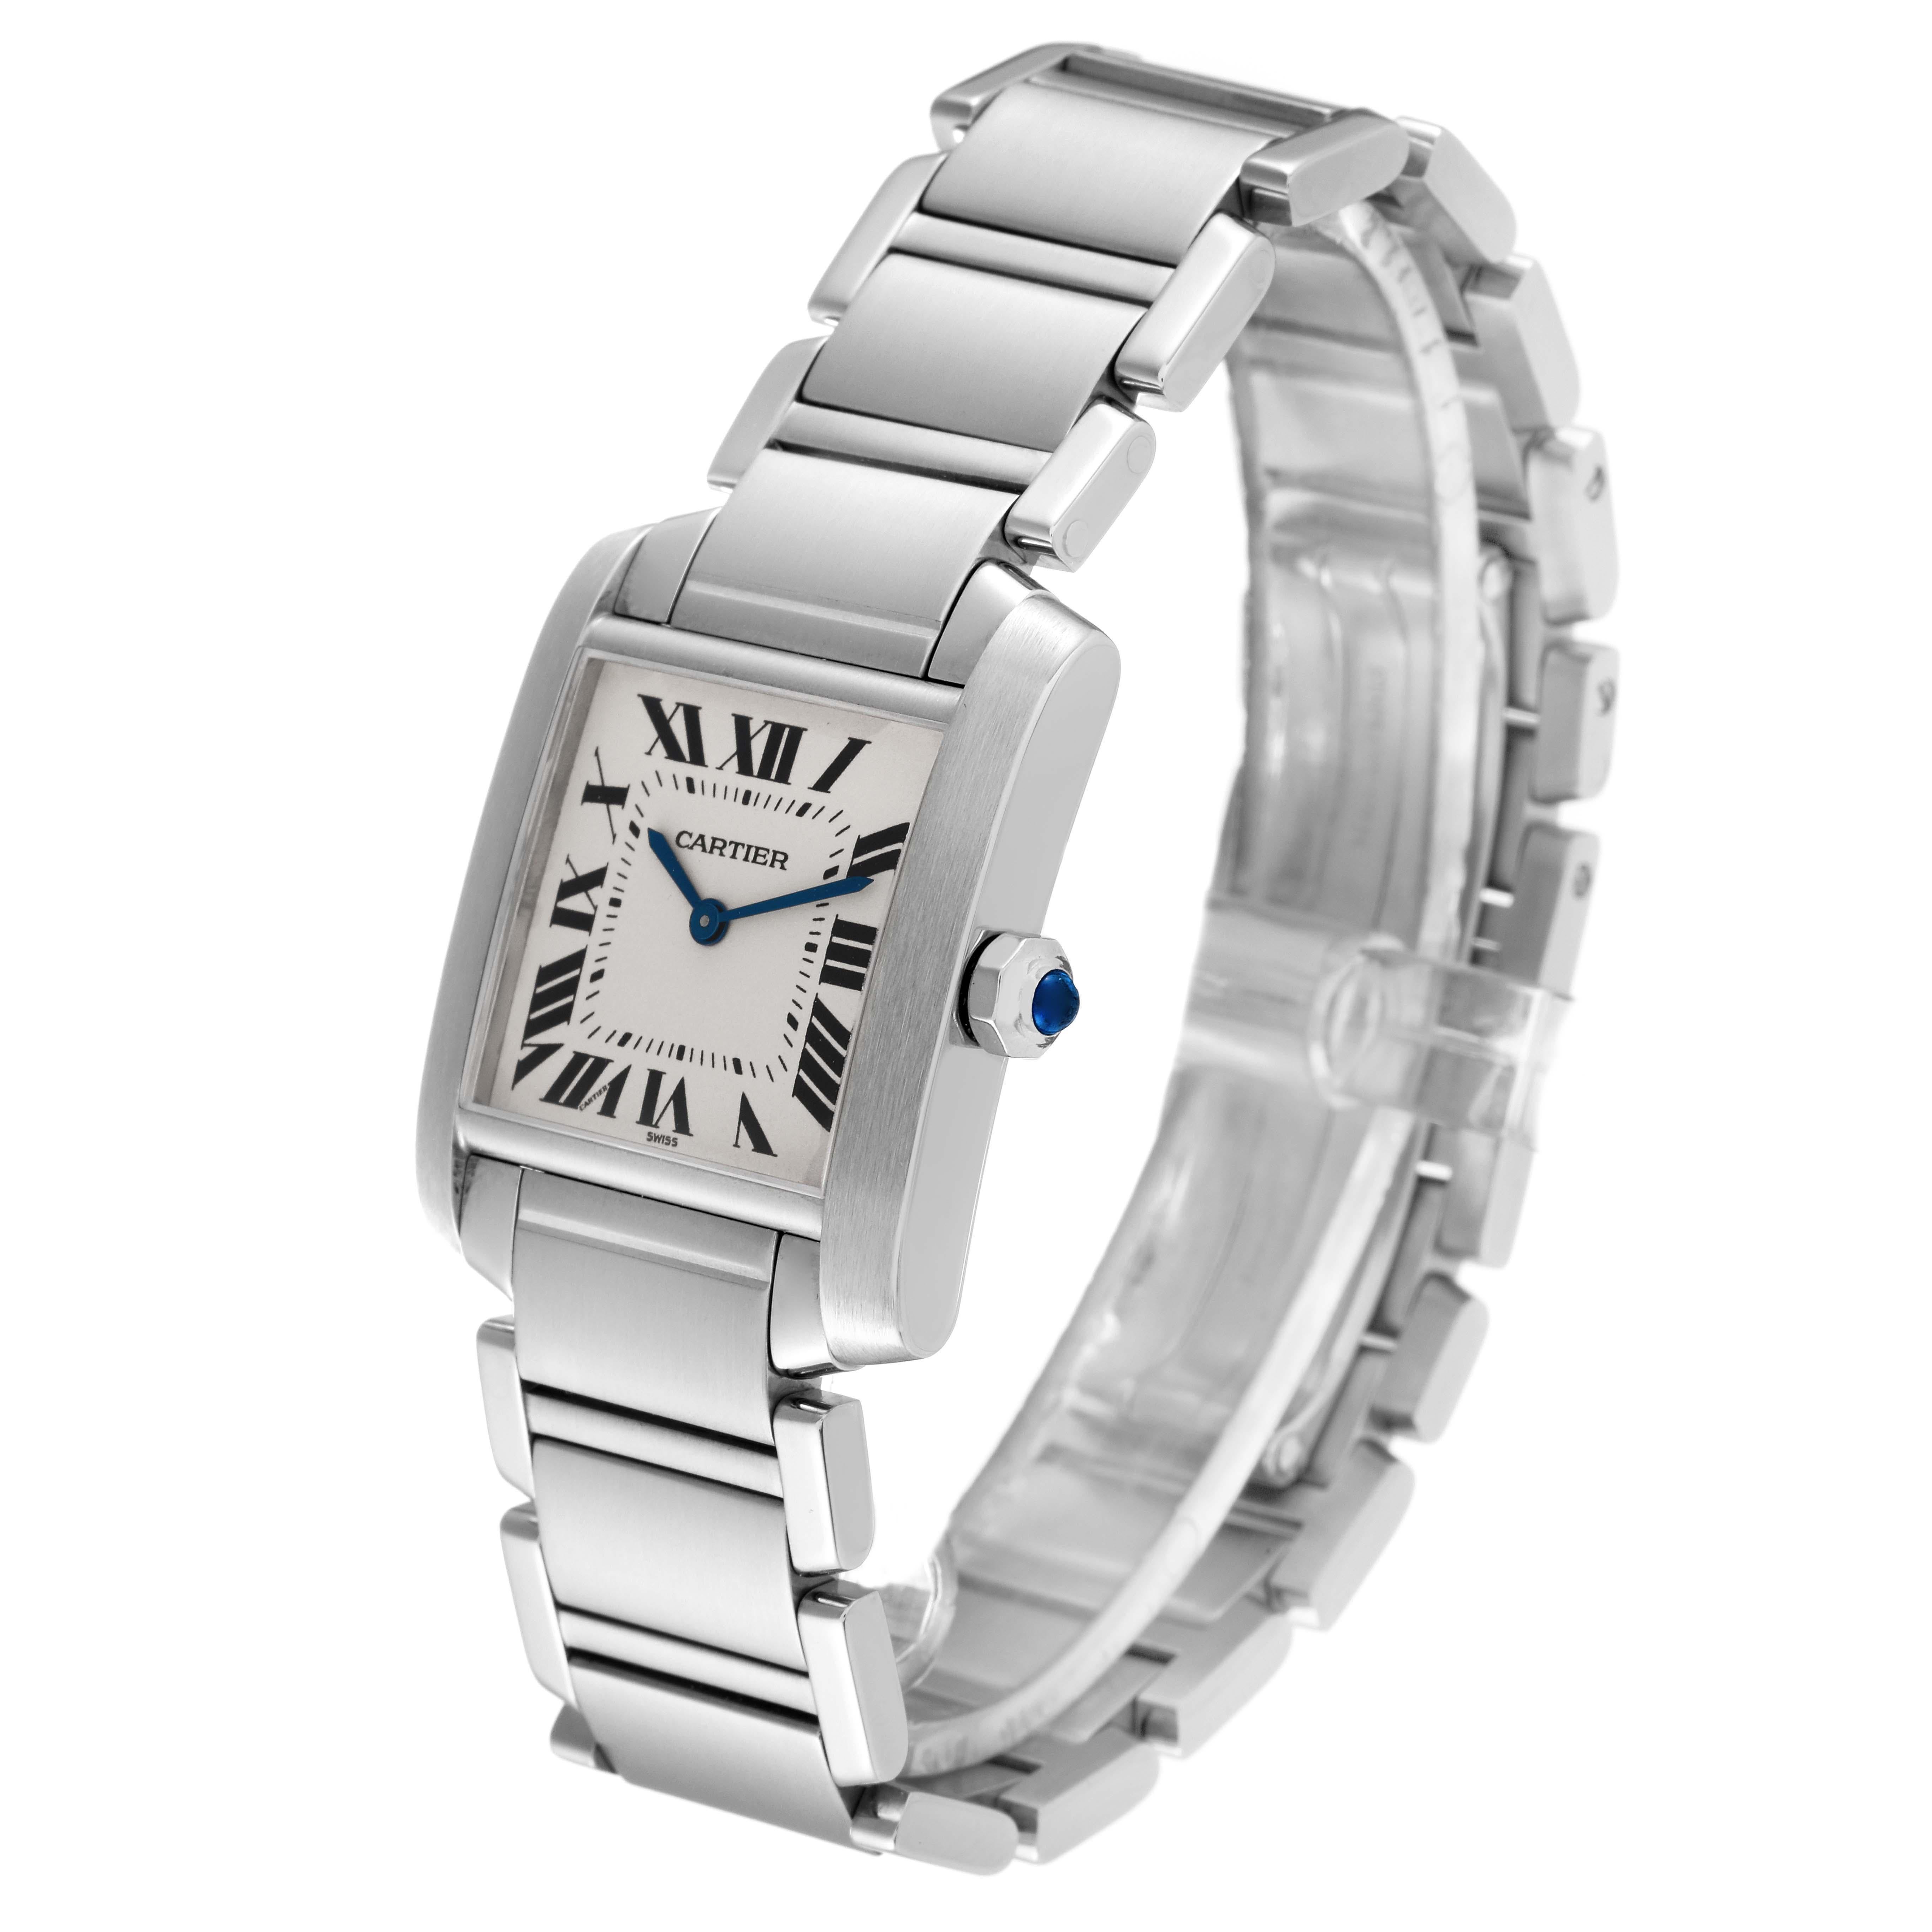 Cartier Tank Francaise Midsize Steel Ladies Watch WSTA0005 In Excellent Condition For Sale In Atlanta, GA